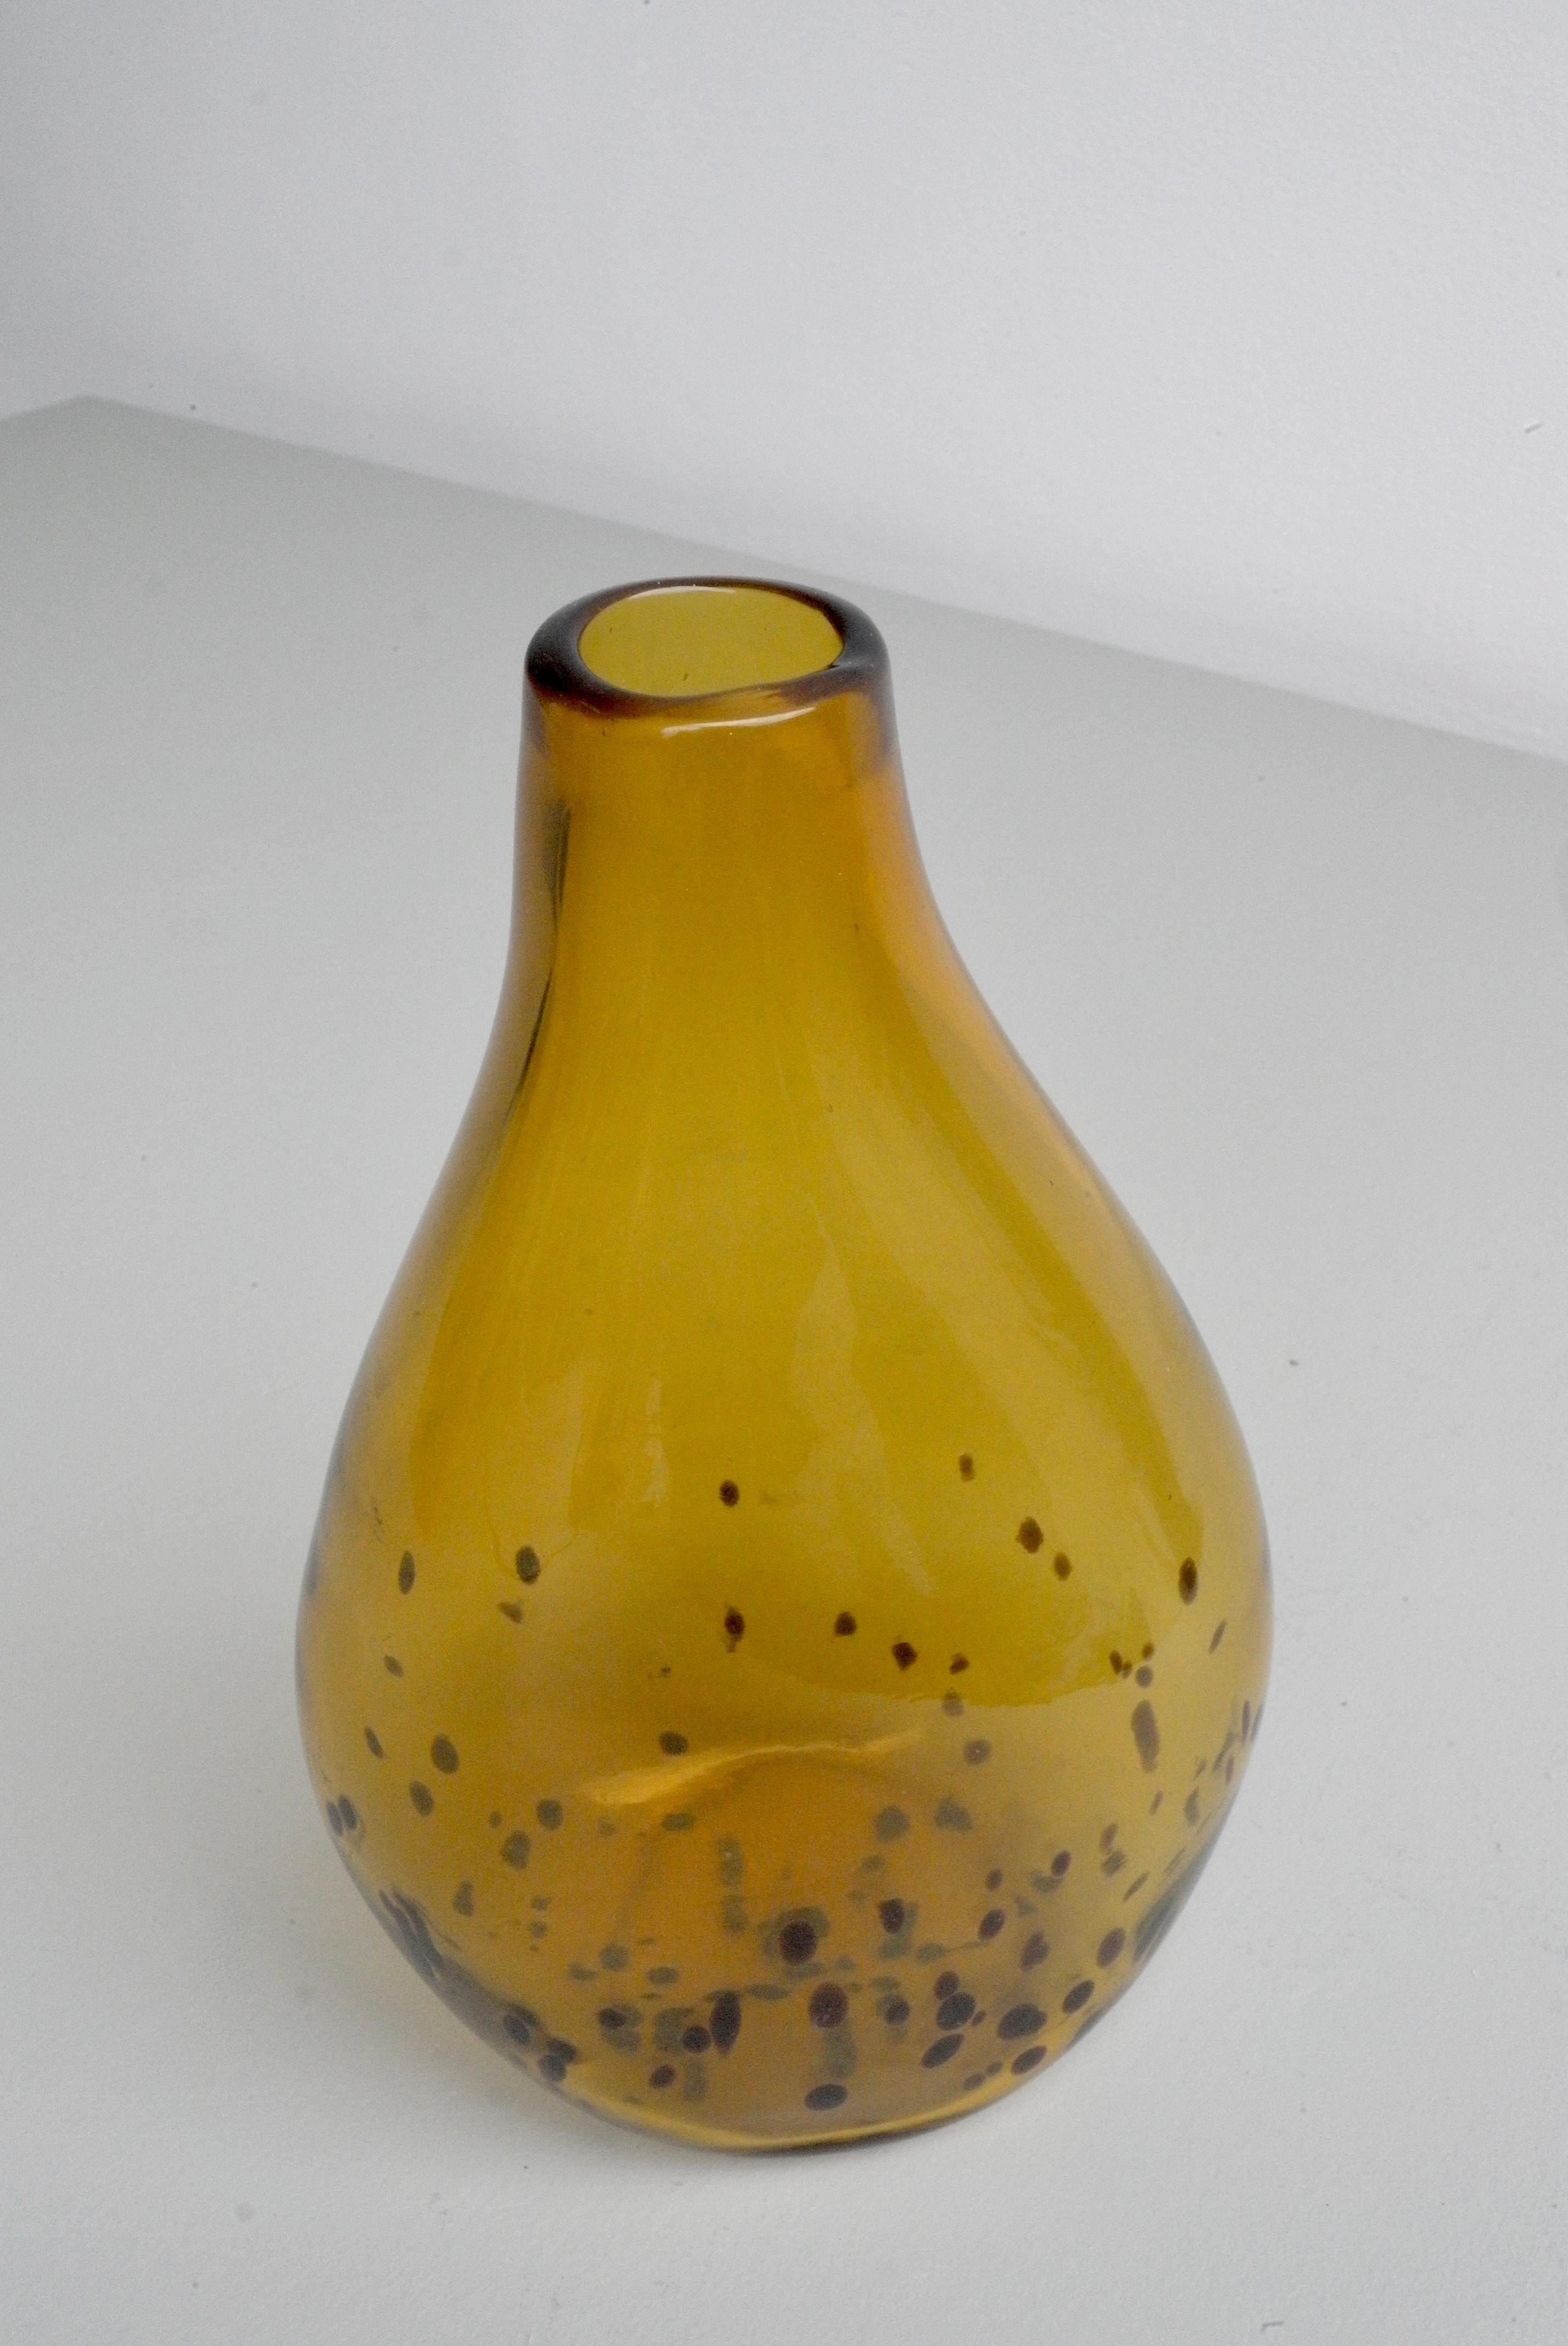 European Decorative Yellow and Dots Midcentury Glass Art Vase, 1960s For Sale